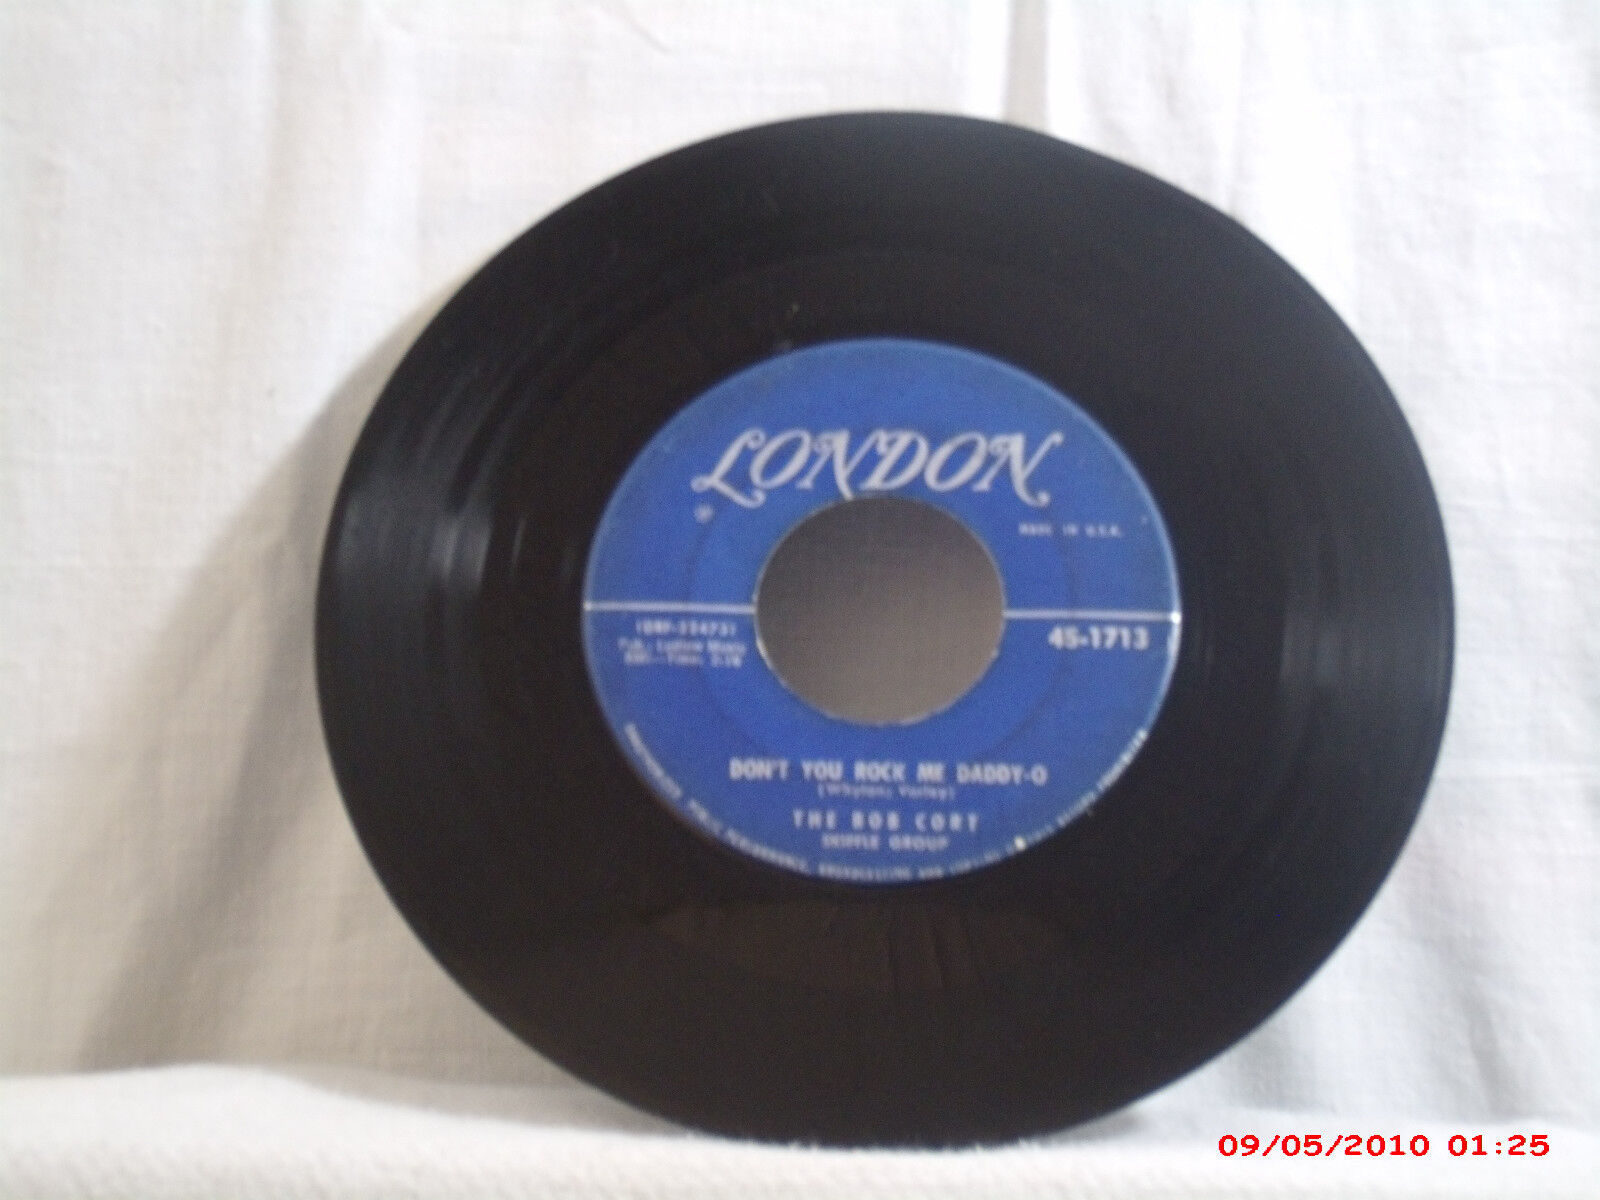 THE BOB CORT SKIFFLE GROUP-i-(45)-DON\'T YOU ROCK ME DADDY-O /--LONDON 1713 -1957